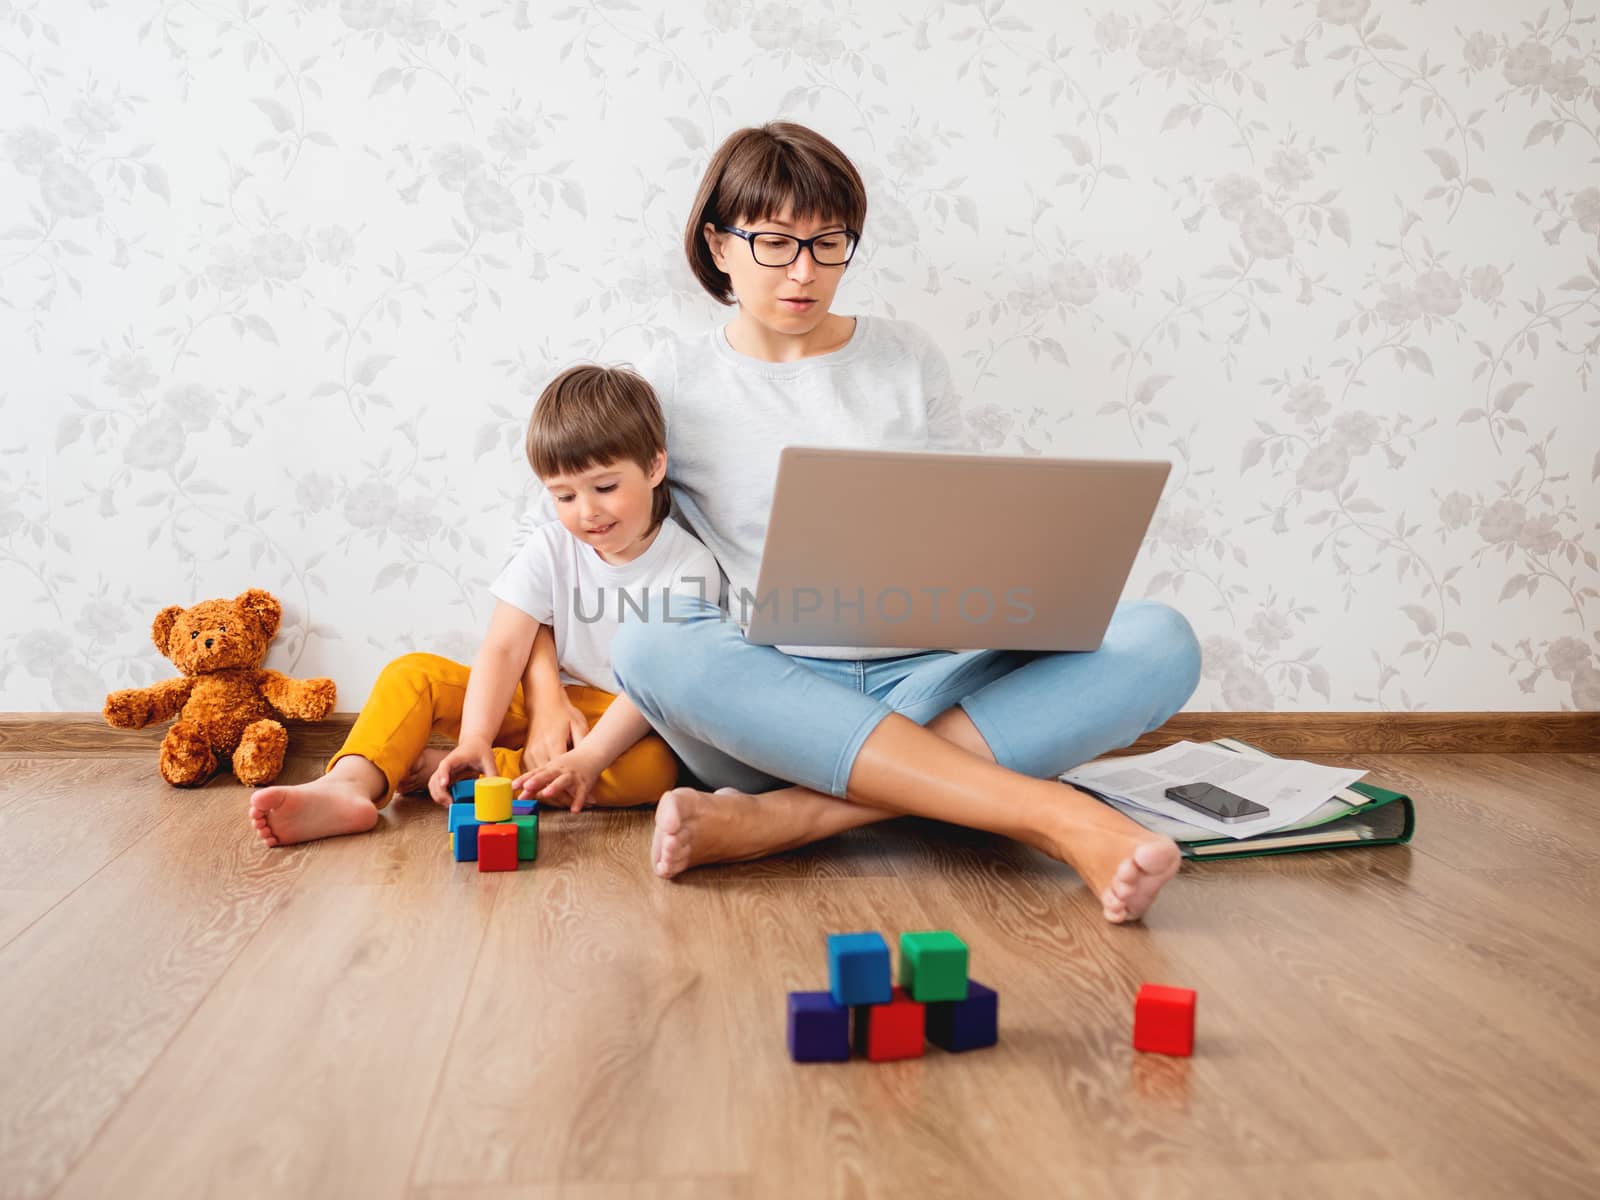 Mom and son sitting at home quarantine because of coronavirus COVID19. Mother remote works with laptop, son plays with toy blocks. Self isolation at home. by aksenovko